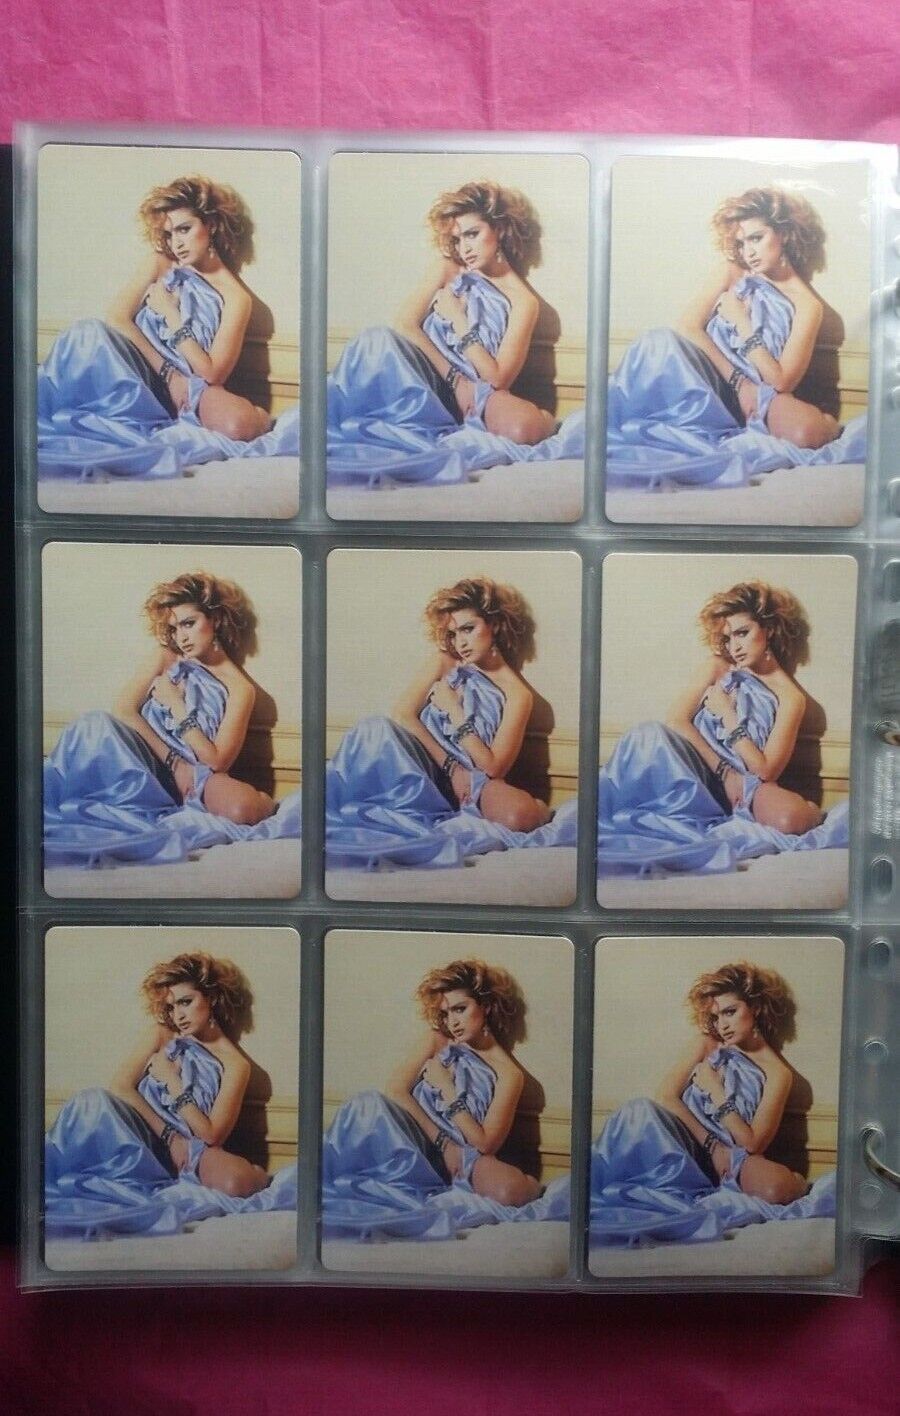 MADONNA Exclusive Playing Cards 1 Off Only Besoke pack (Set 24) See Description.